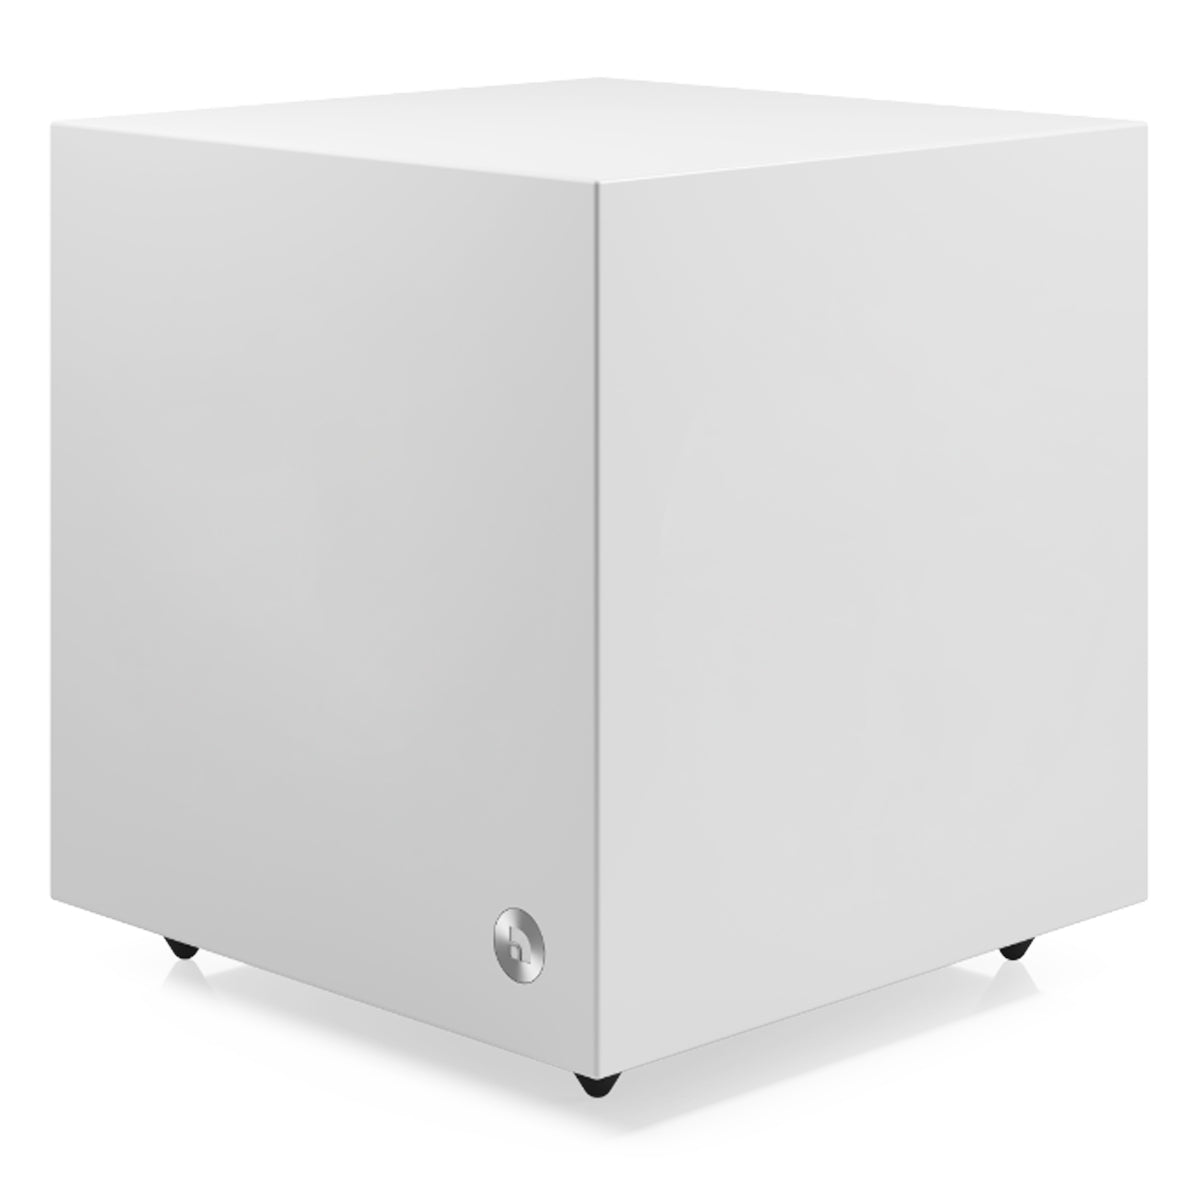 Audio Pro SW5 8" Active Subwoofer - White - The Audio Experts